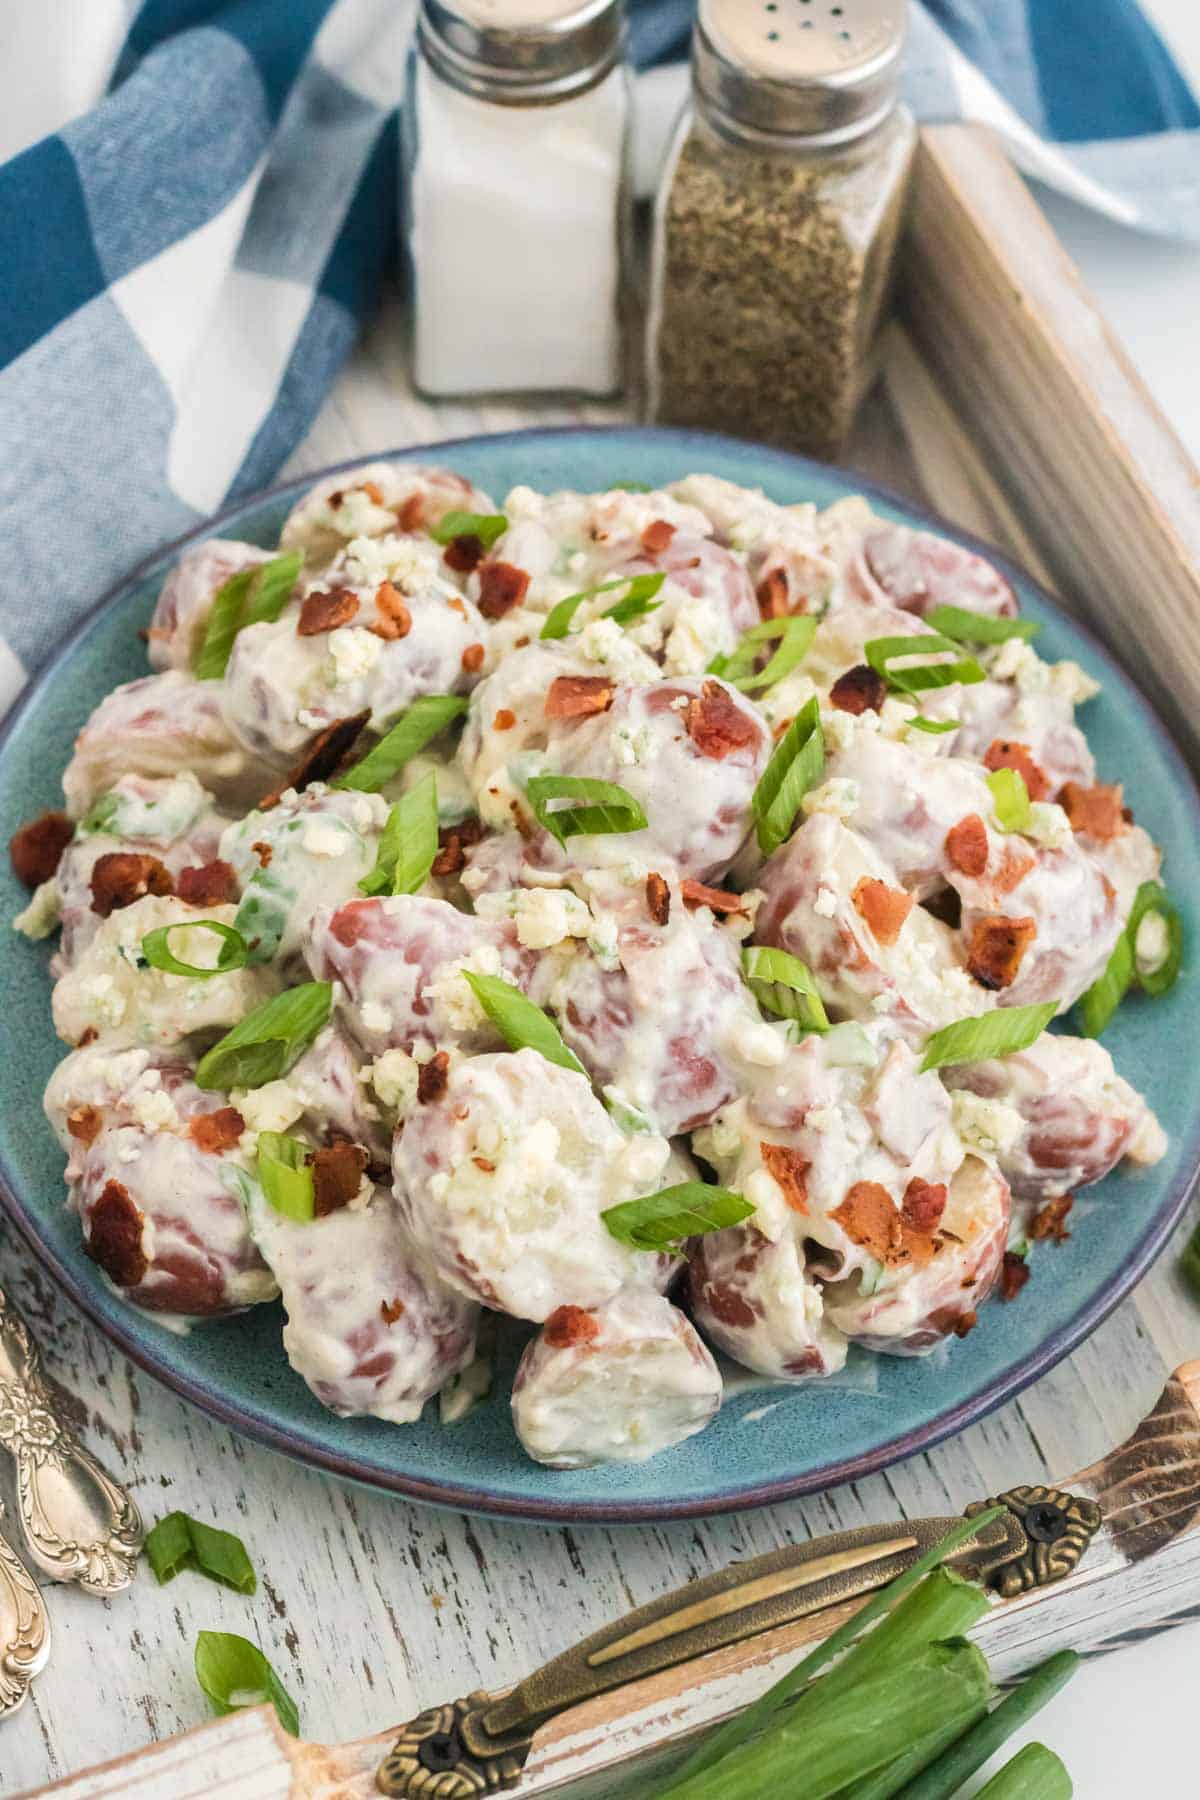 A plate full of blue cheese and bacon potato salad on a wooden tray next to a fork.